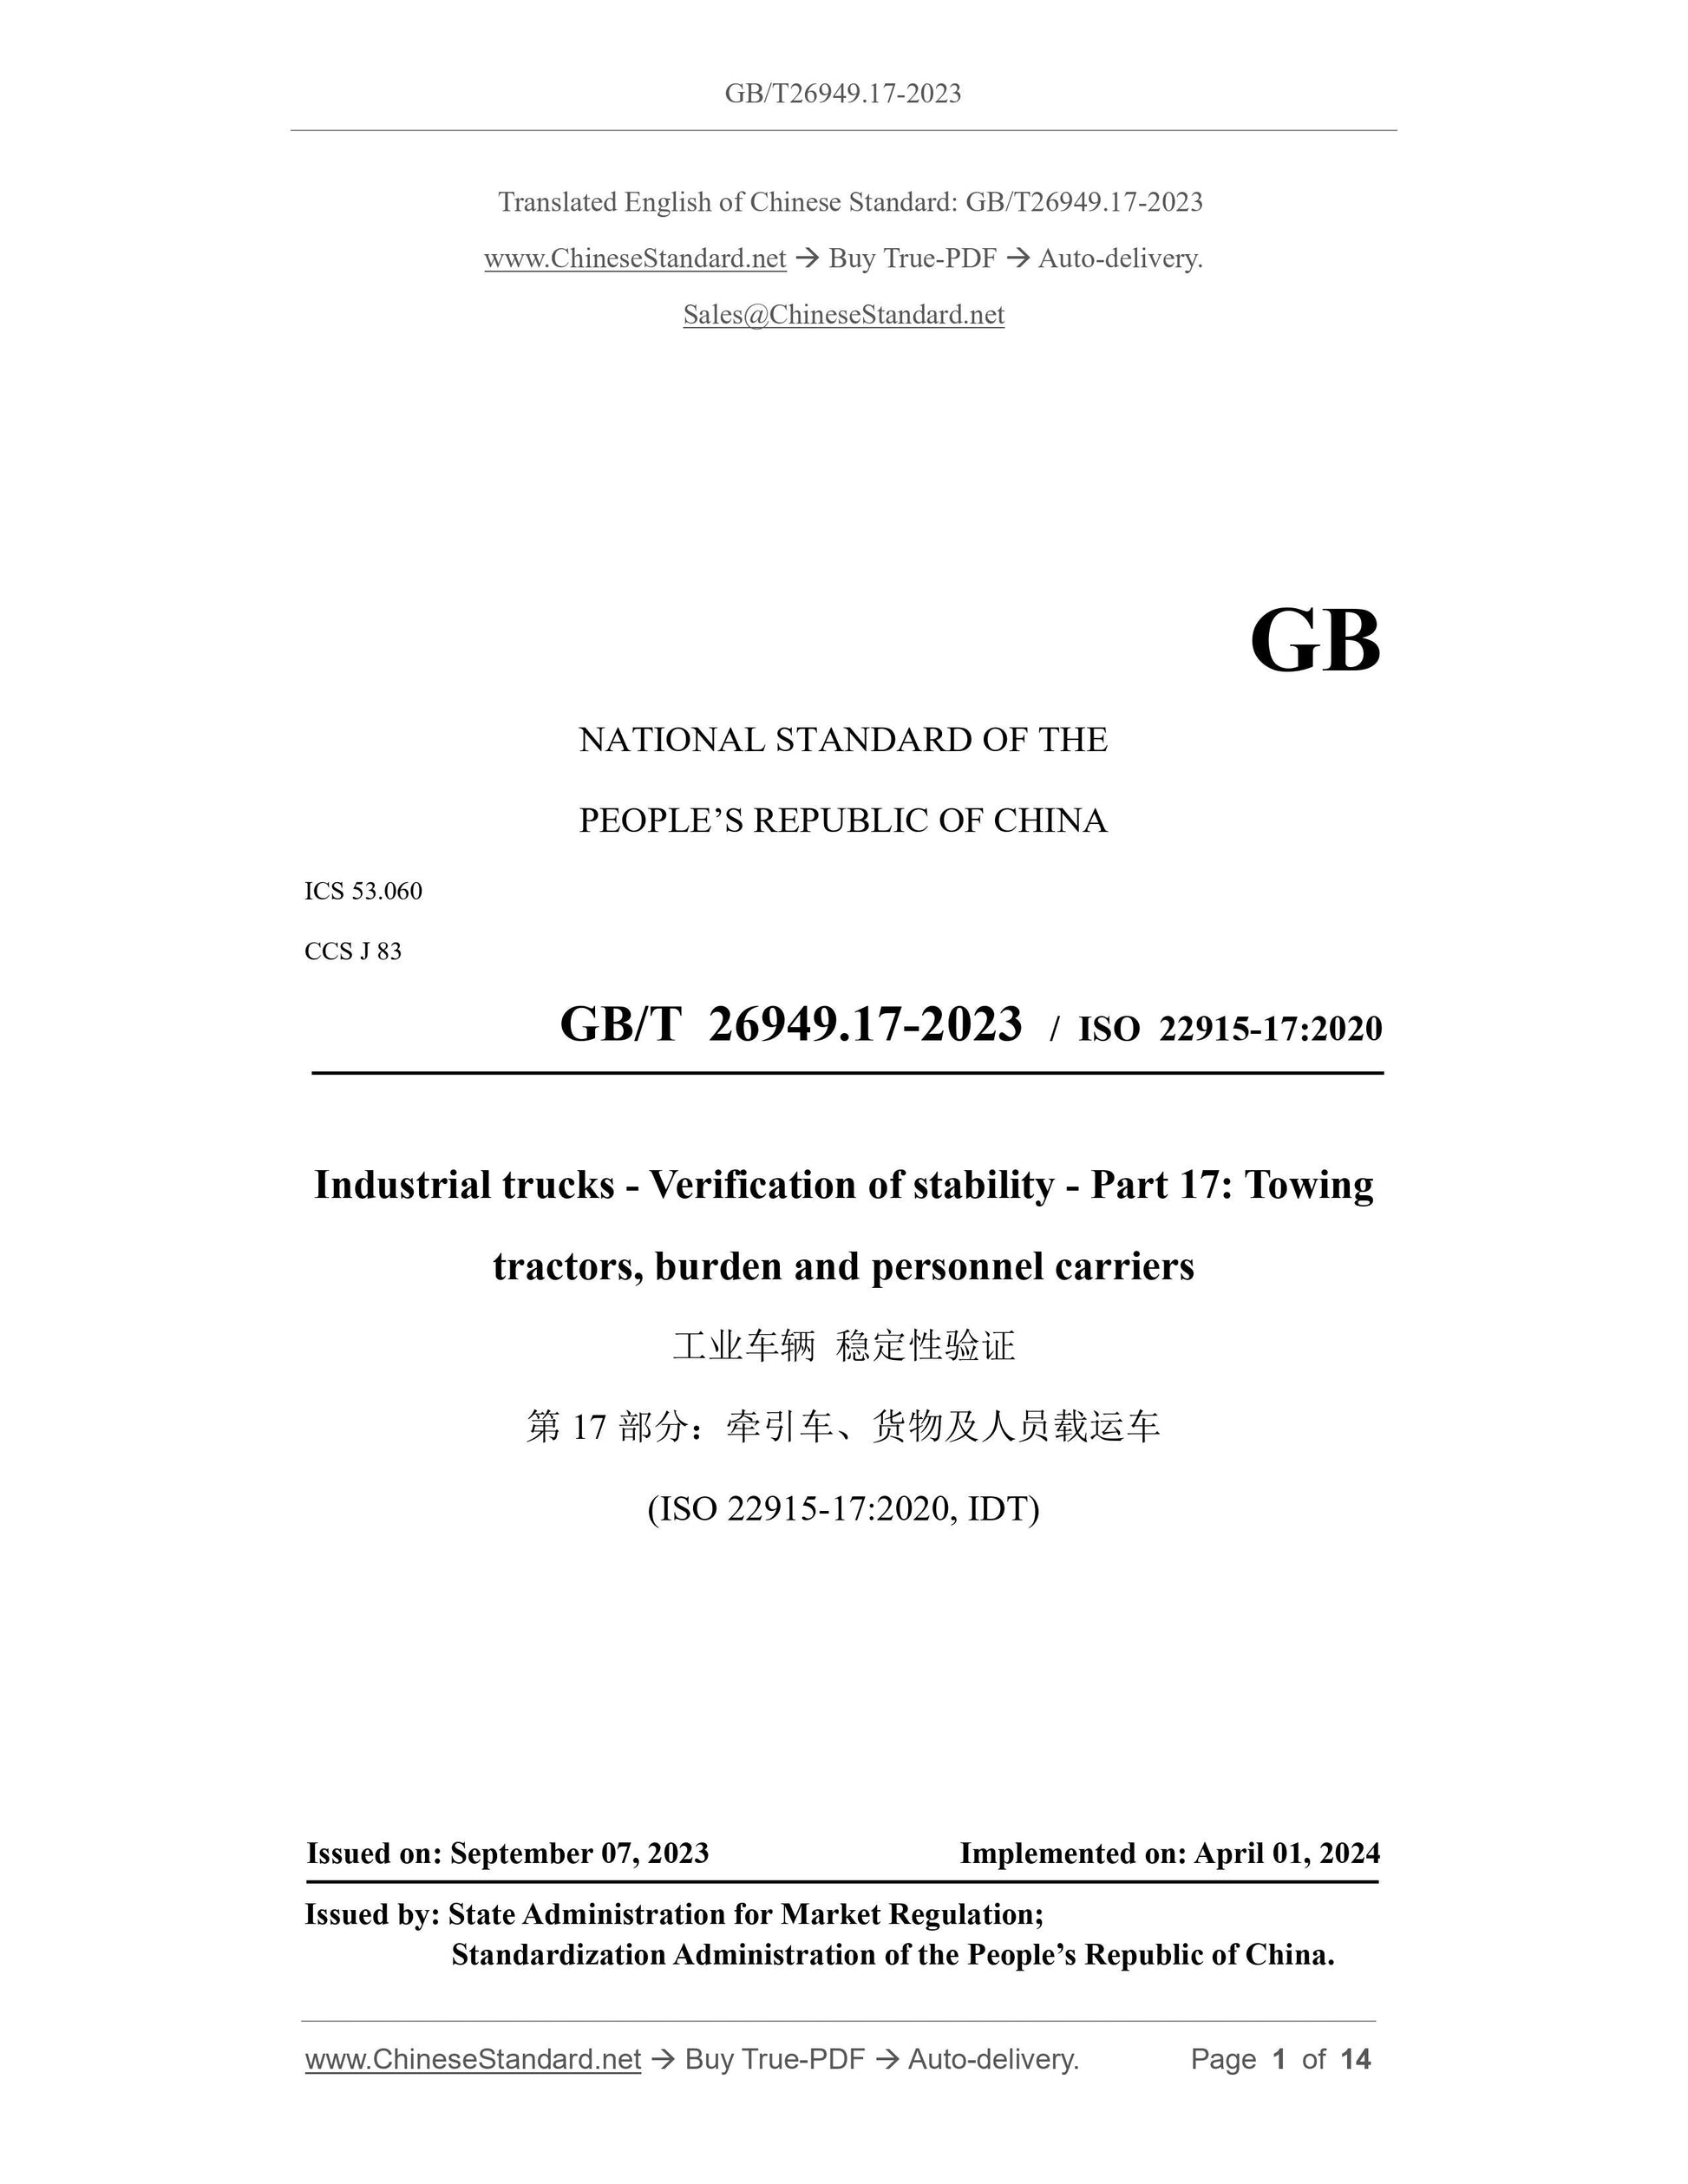 GB/T 26949.17-2023 Page 1